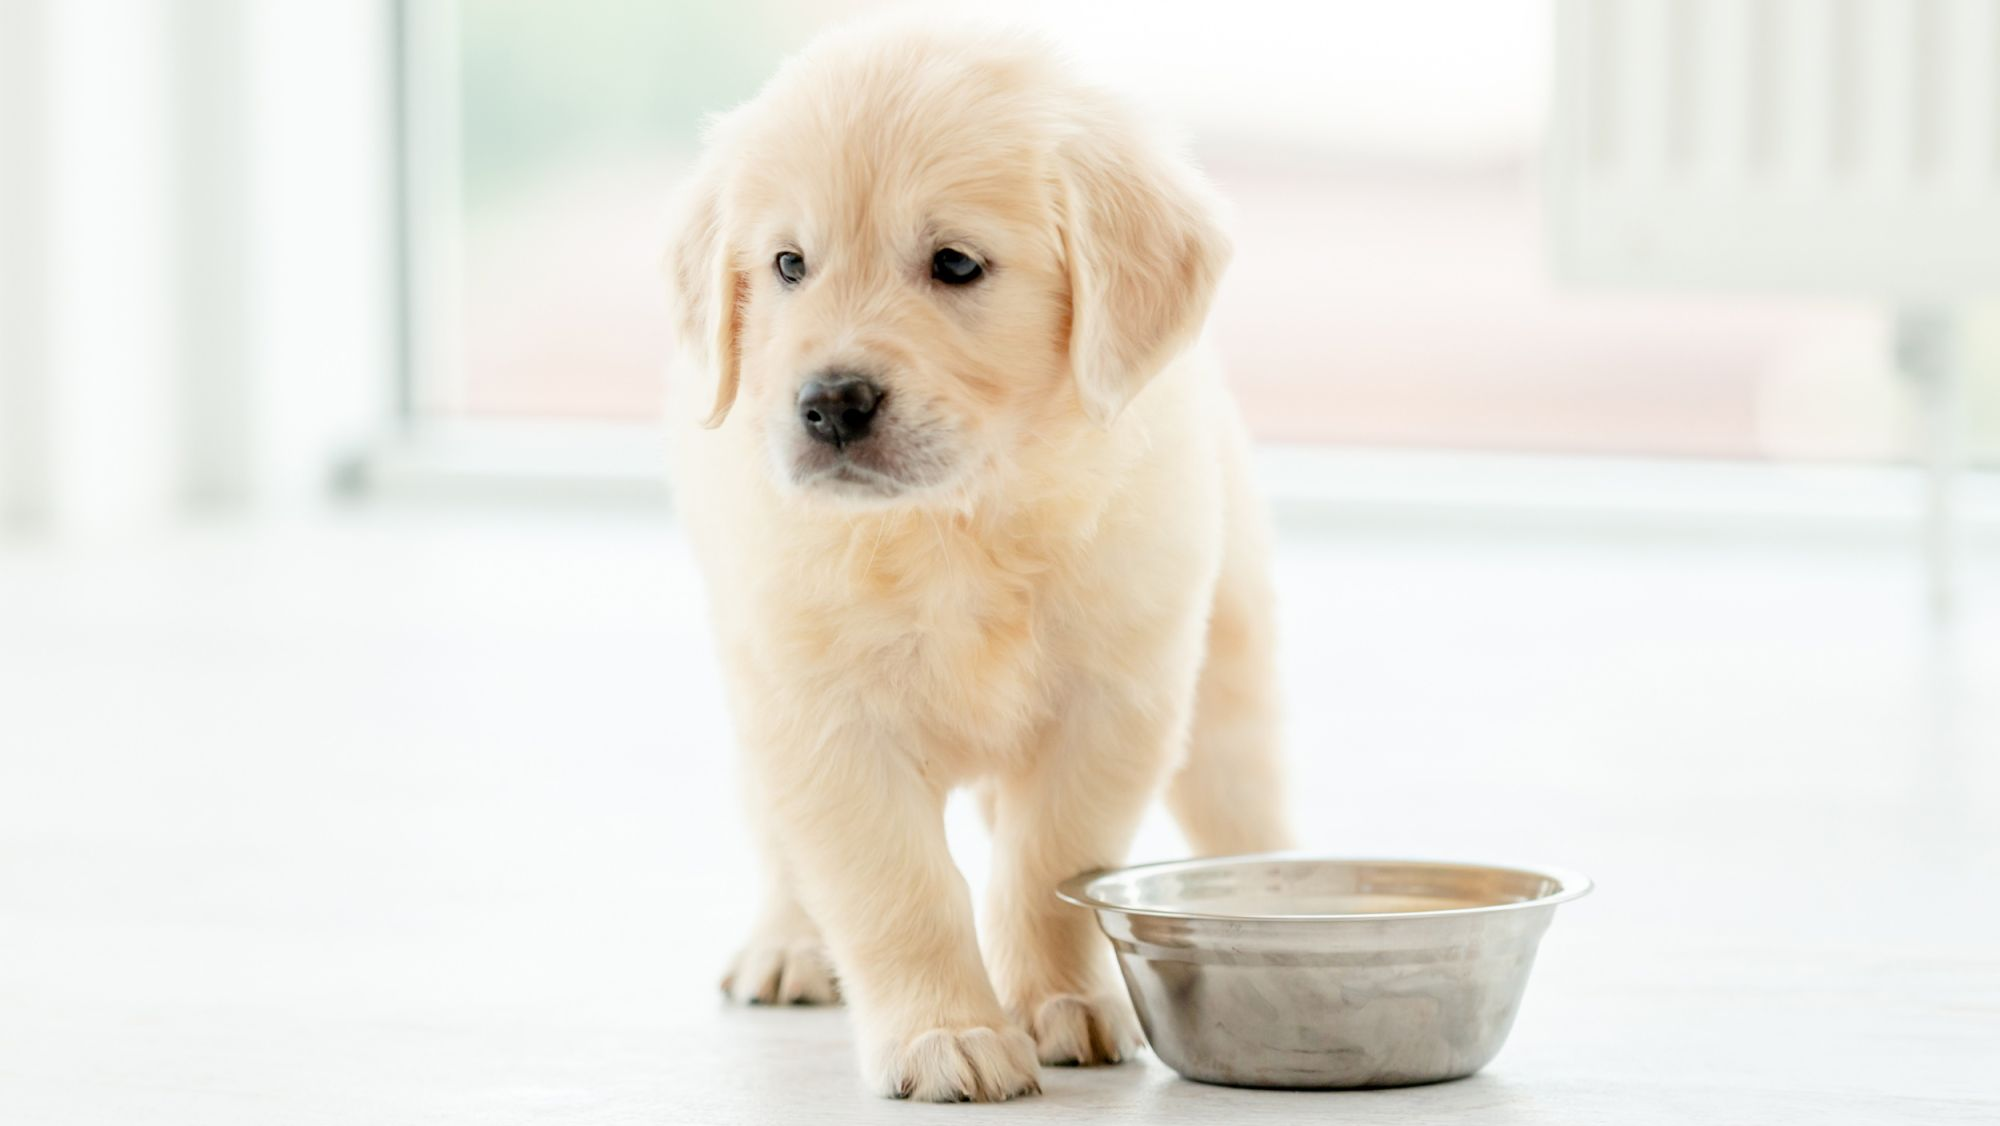 Puppy by a bowl